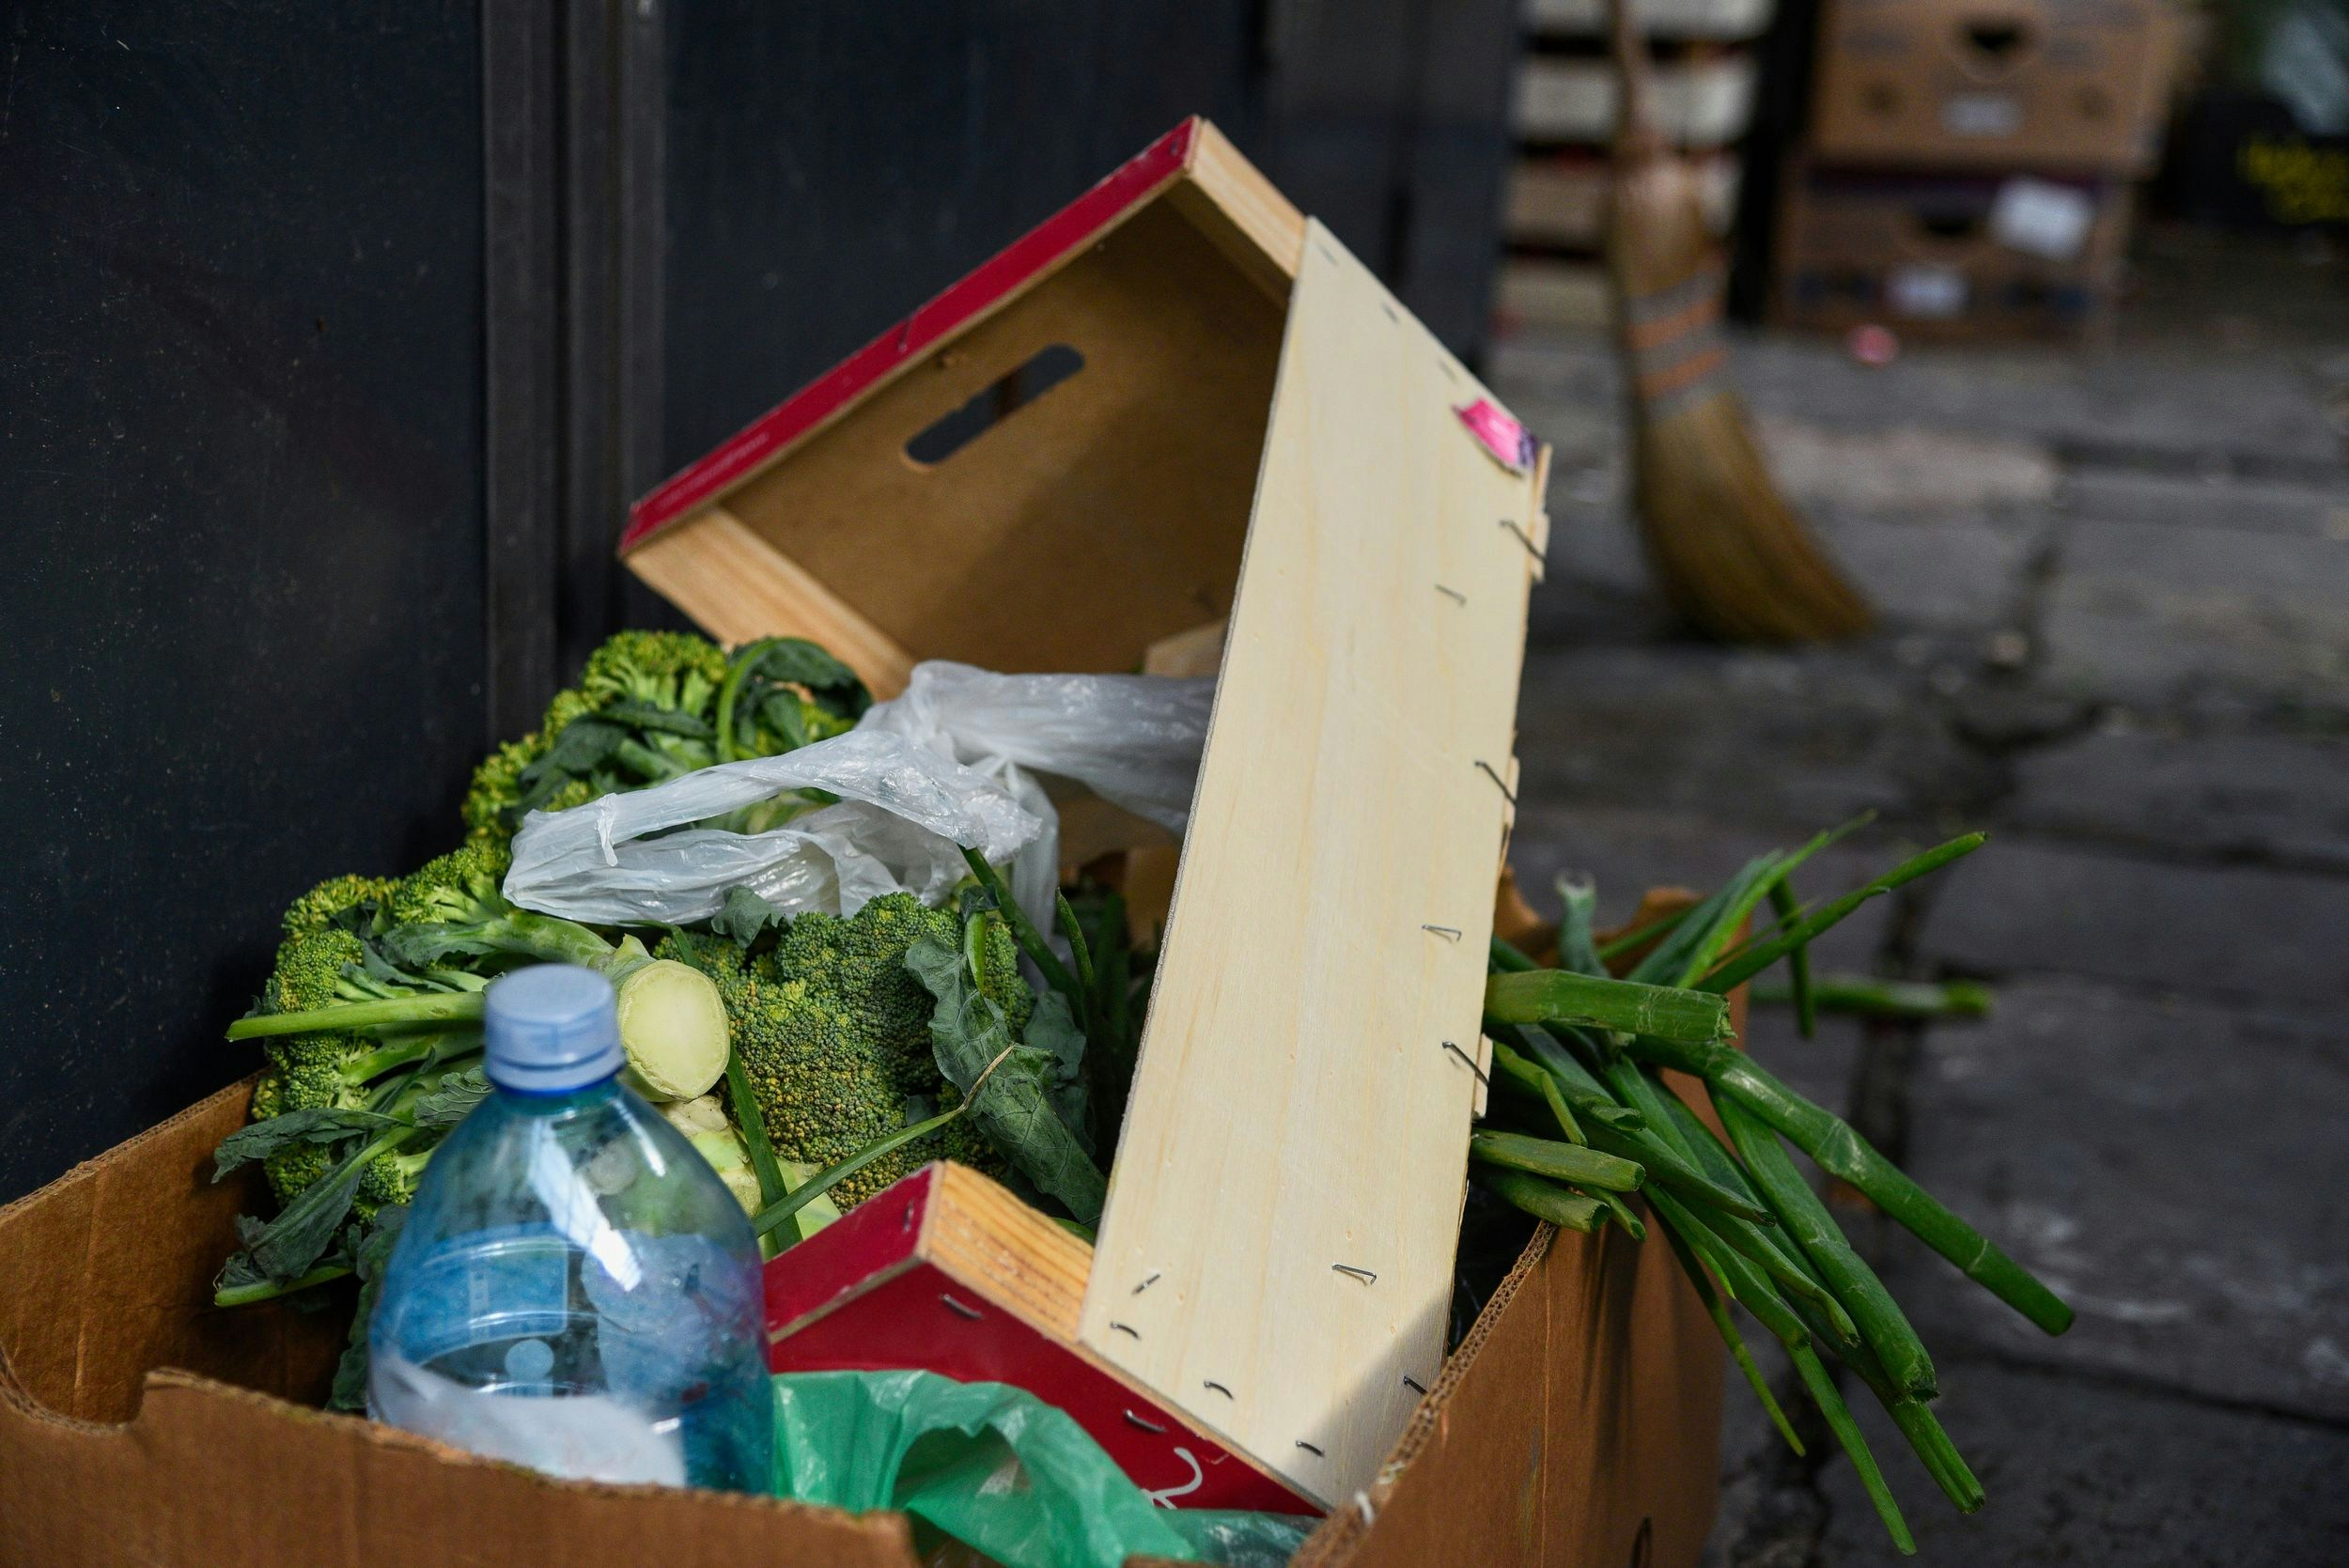 More than we can chew: Solving the food waste crisis